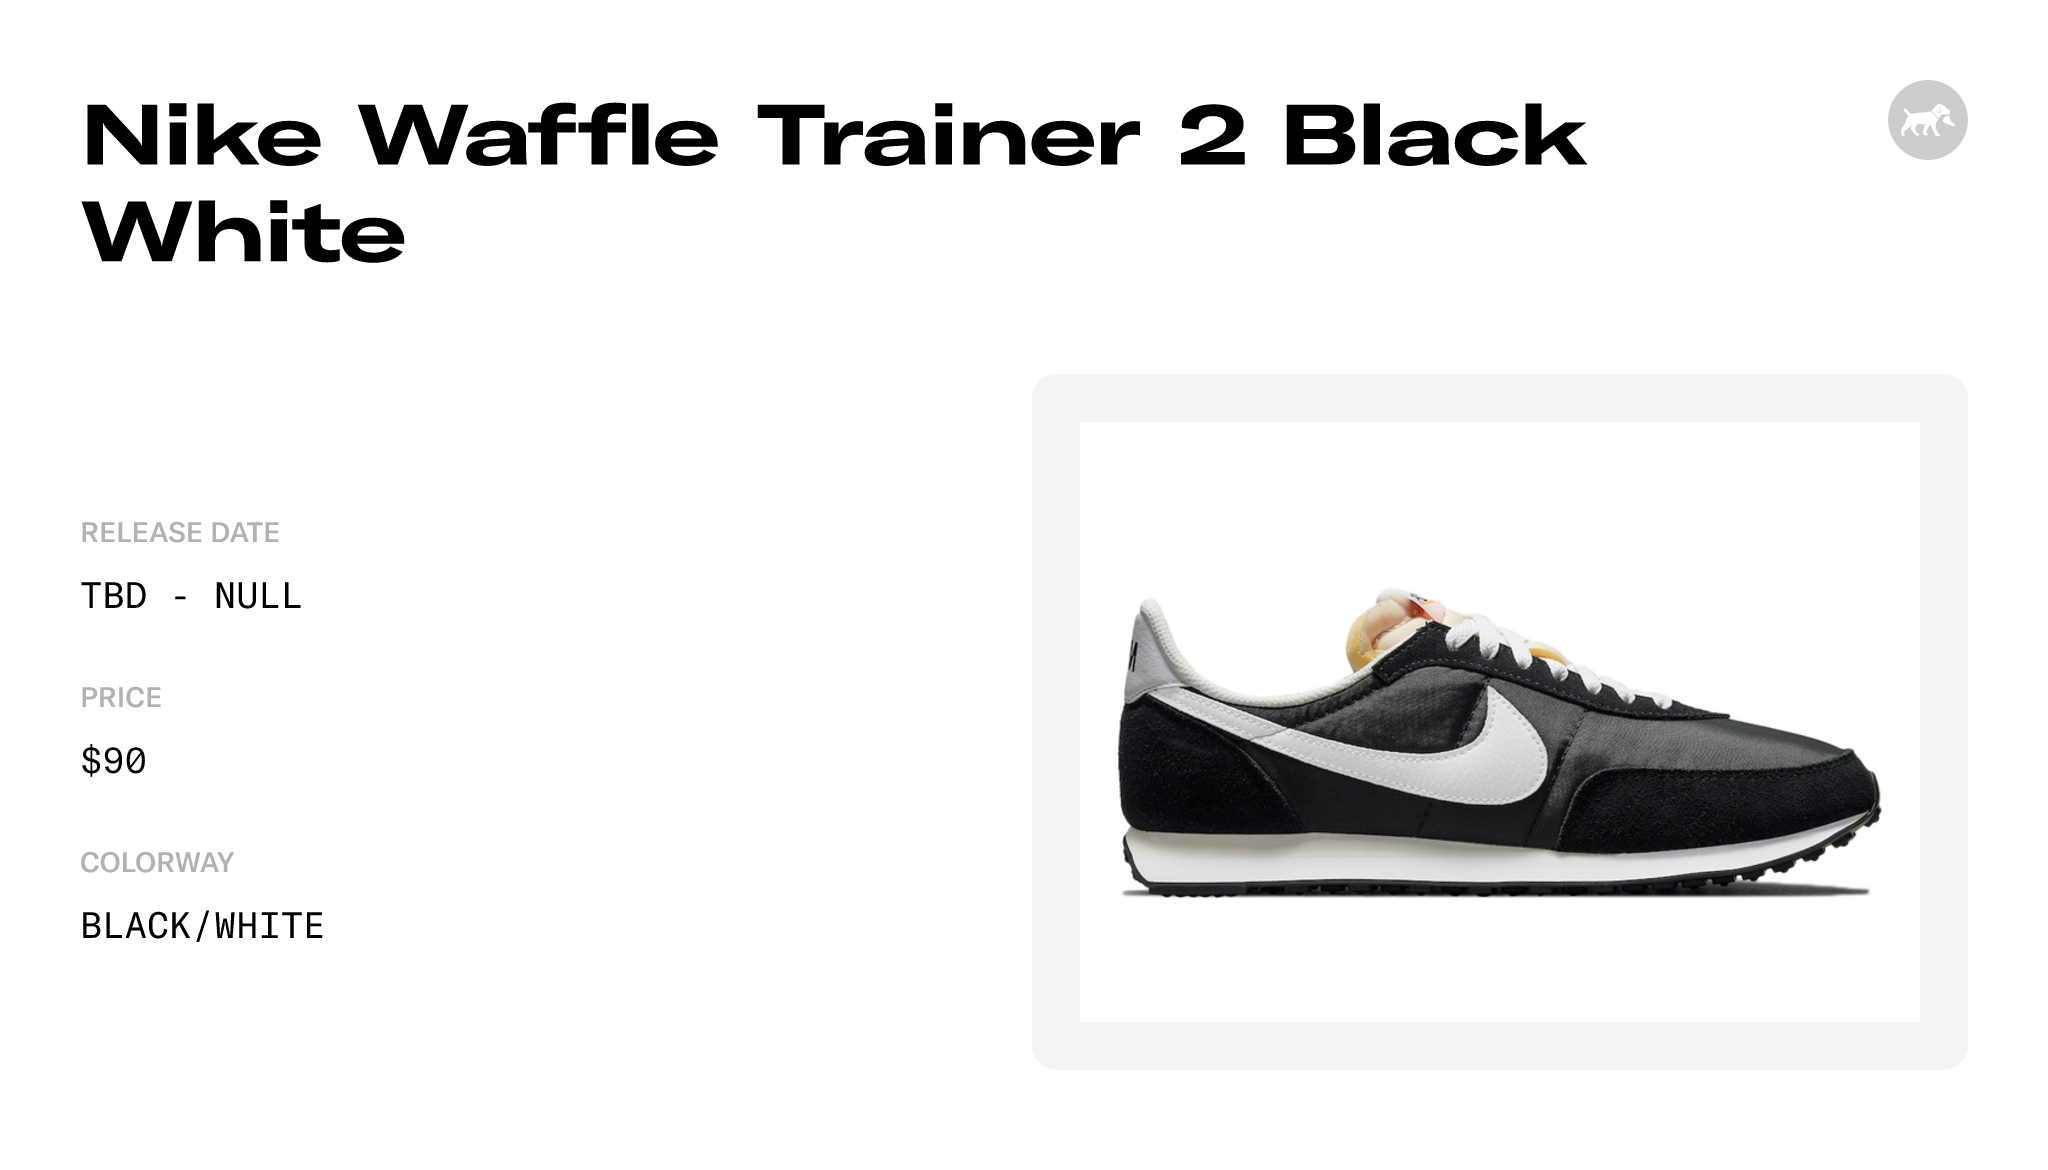 Nike Waffle Trainer 2 Black White - DH1349-001 Raffles and Release Date